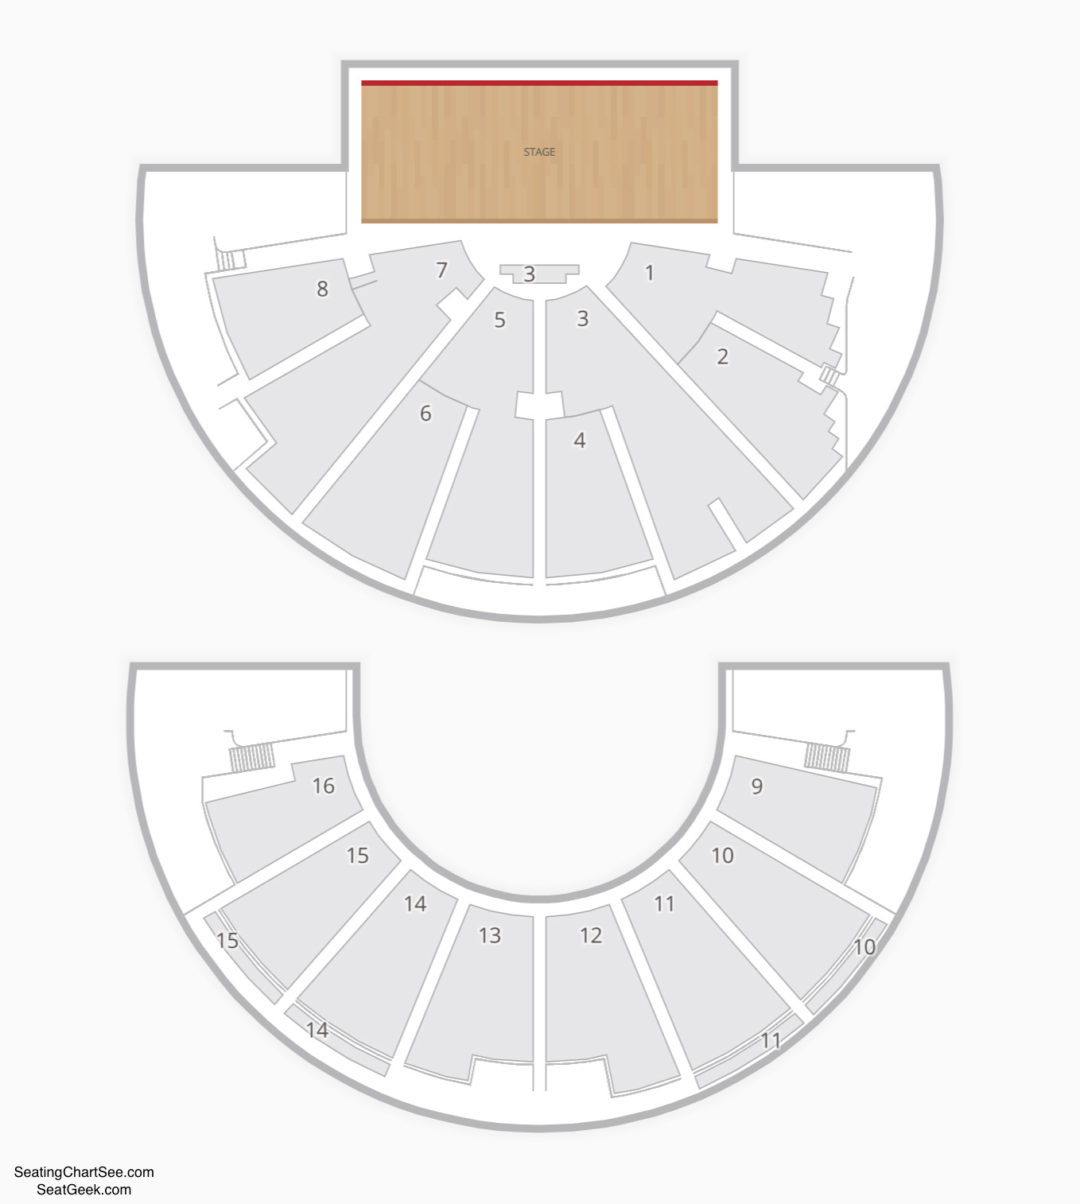 Ryman Auditorium Seating Chart Interactive Awesome Home